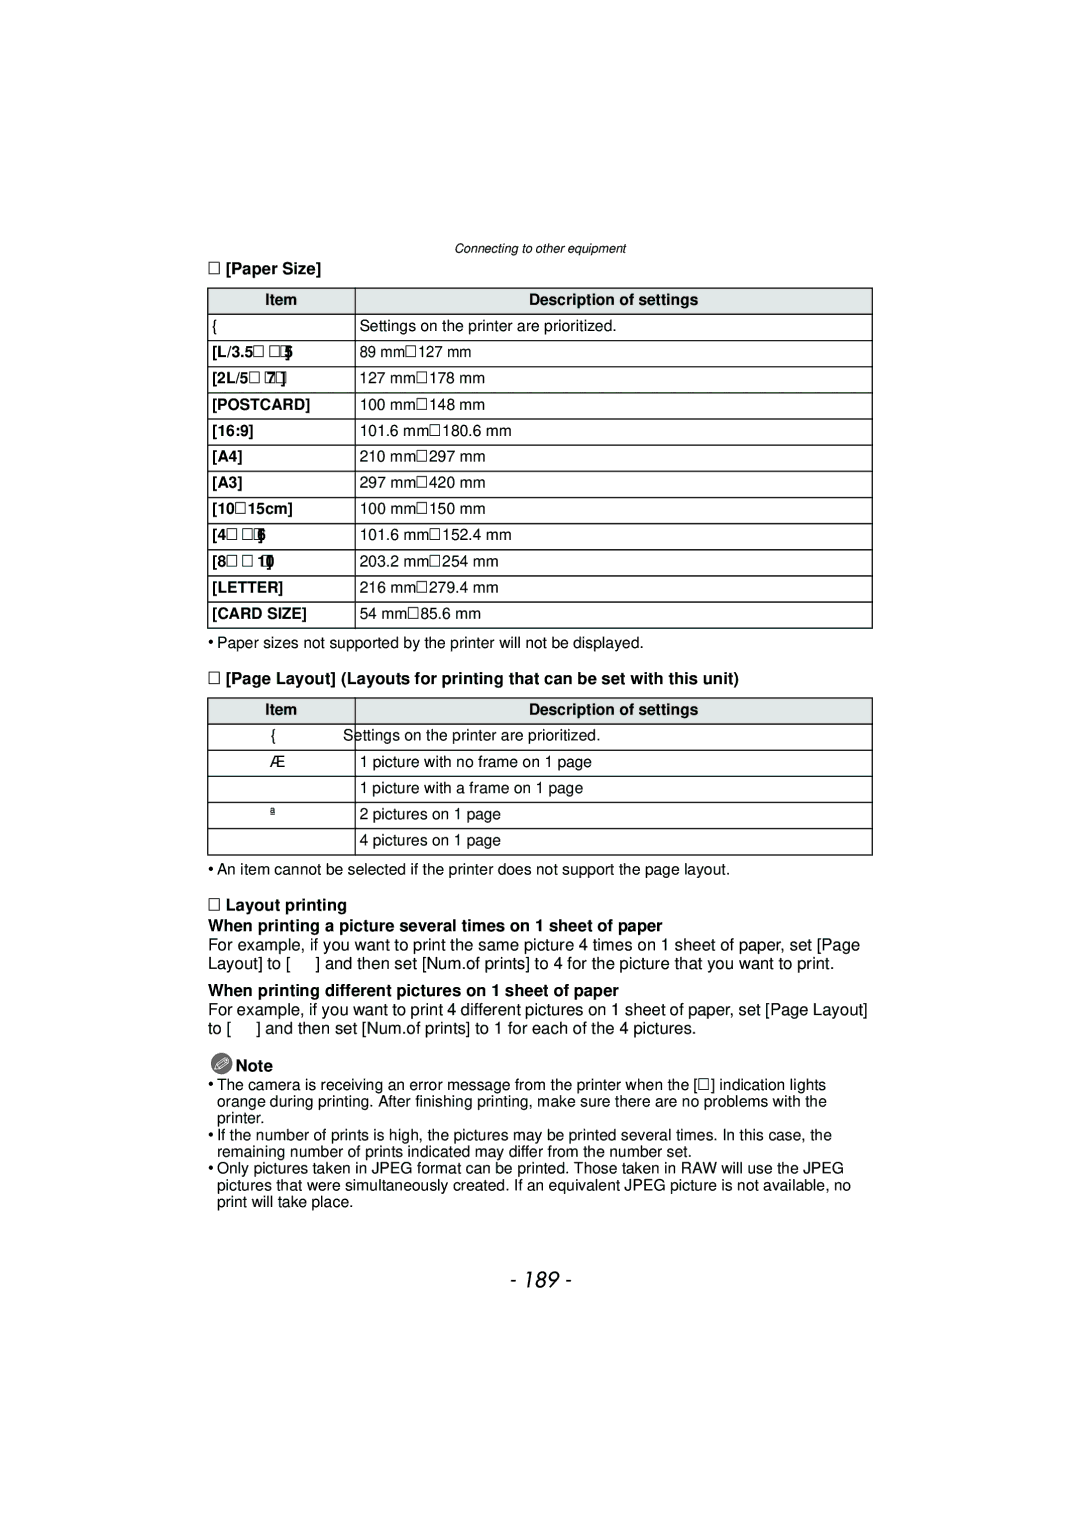 Panasonic DMC-GF5 owner manual 189, Paper Size, Layout Layouts for printing that can be set with this unit 